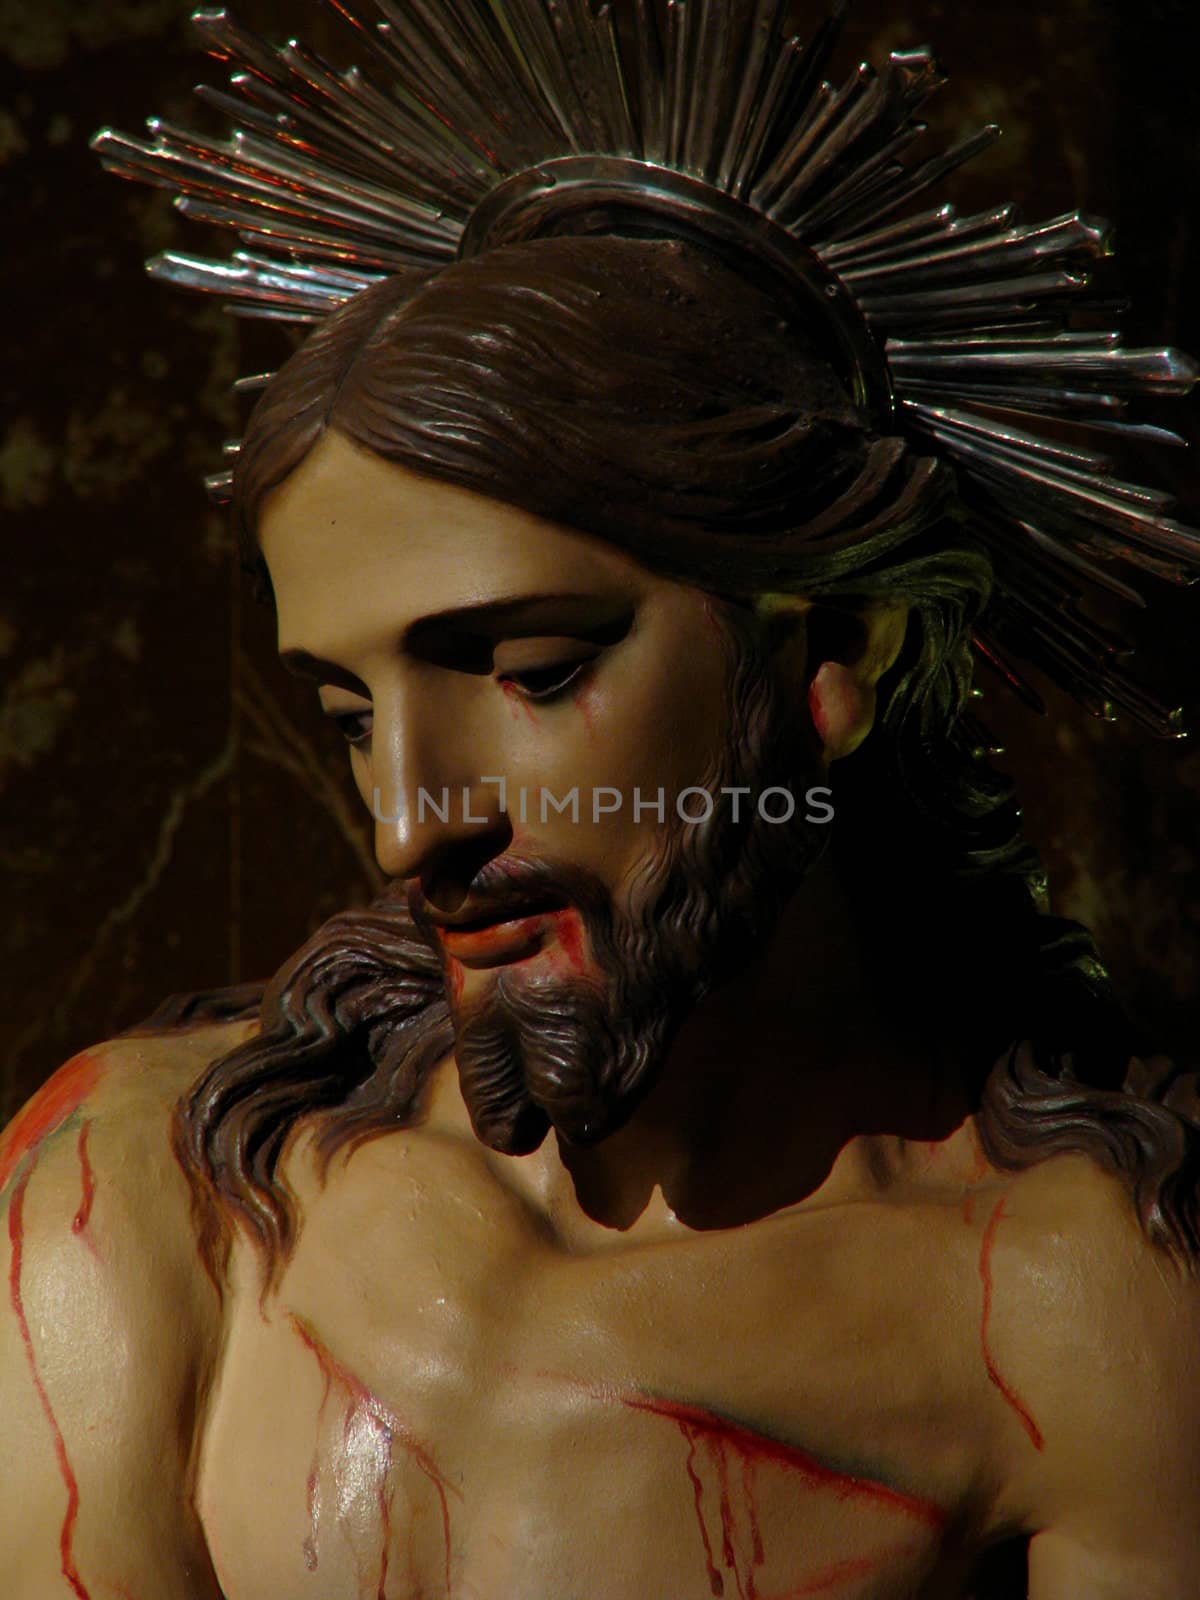 A detail of the statue of The Flagellation of Christ in Senglea, Malta.